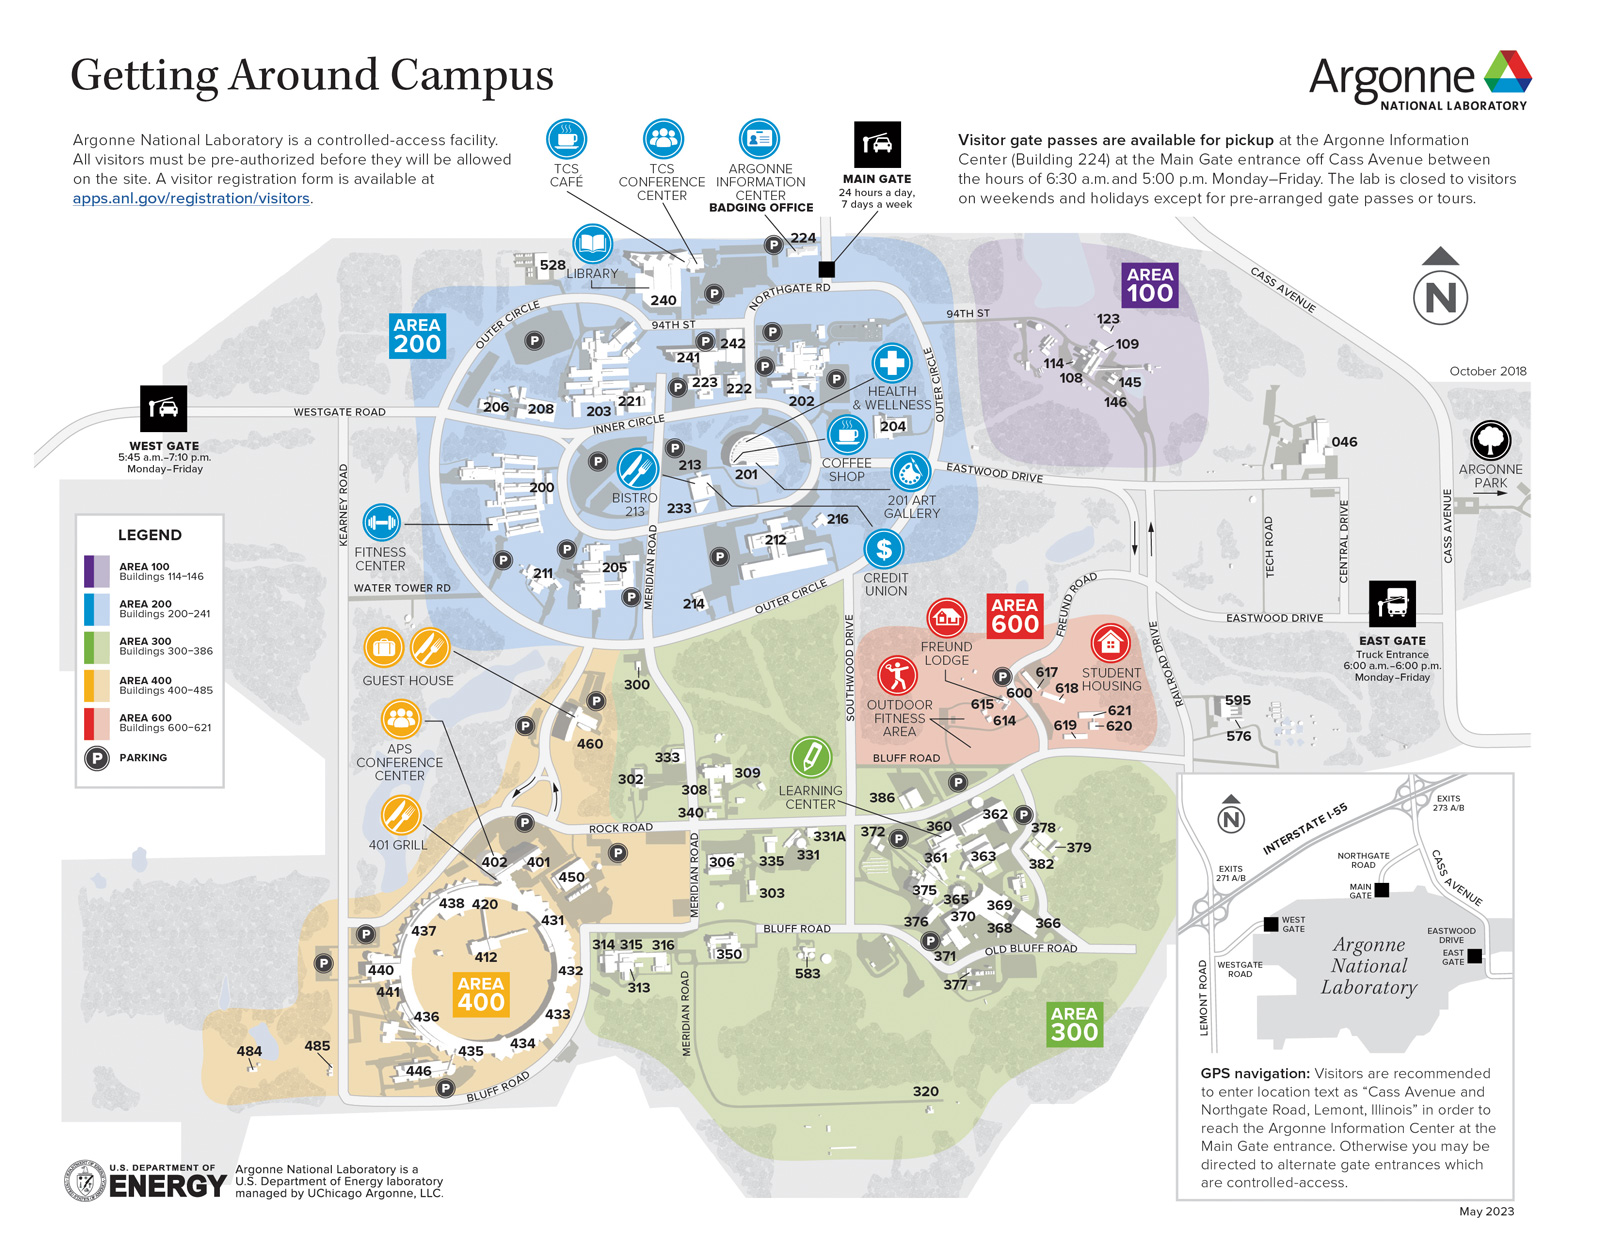 A multi-colored map of the Argonne National Laboratory campus in Lemont, Illinois.